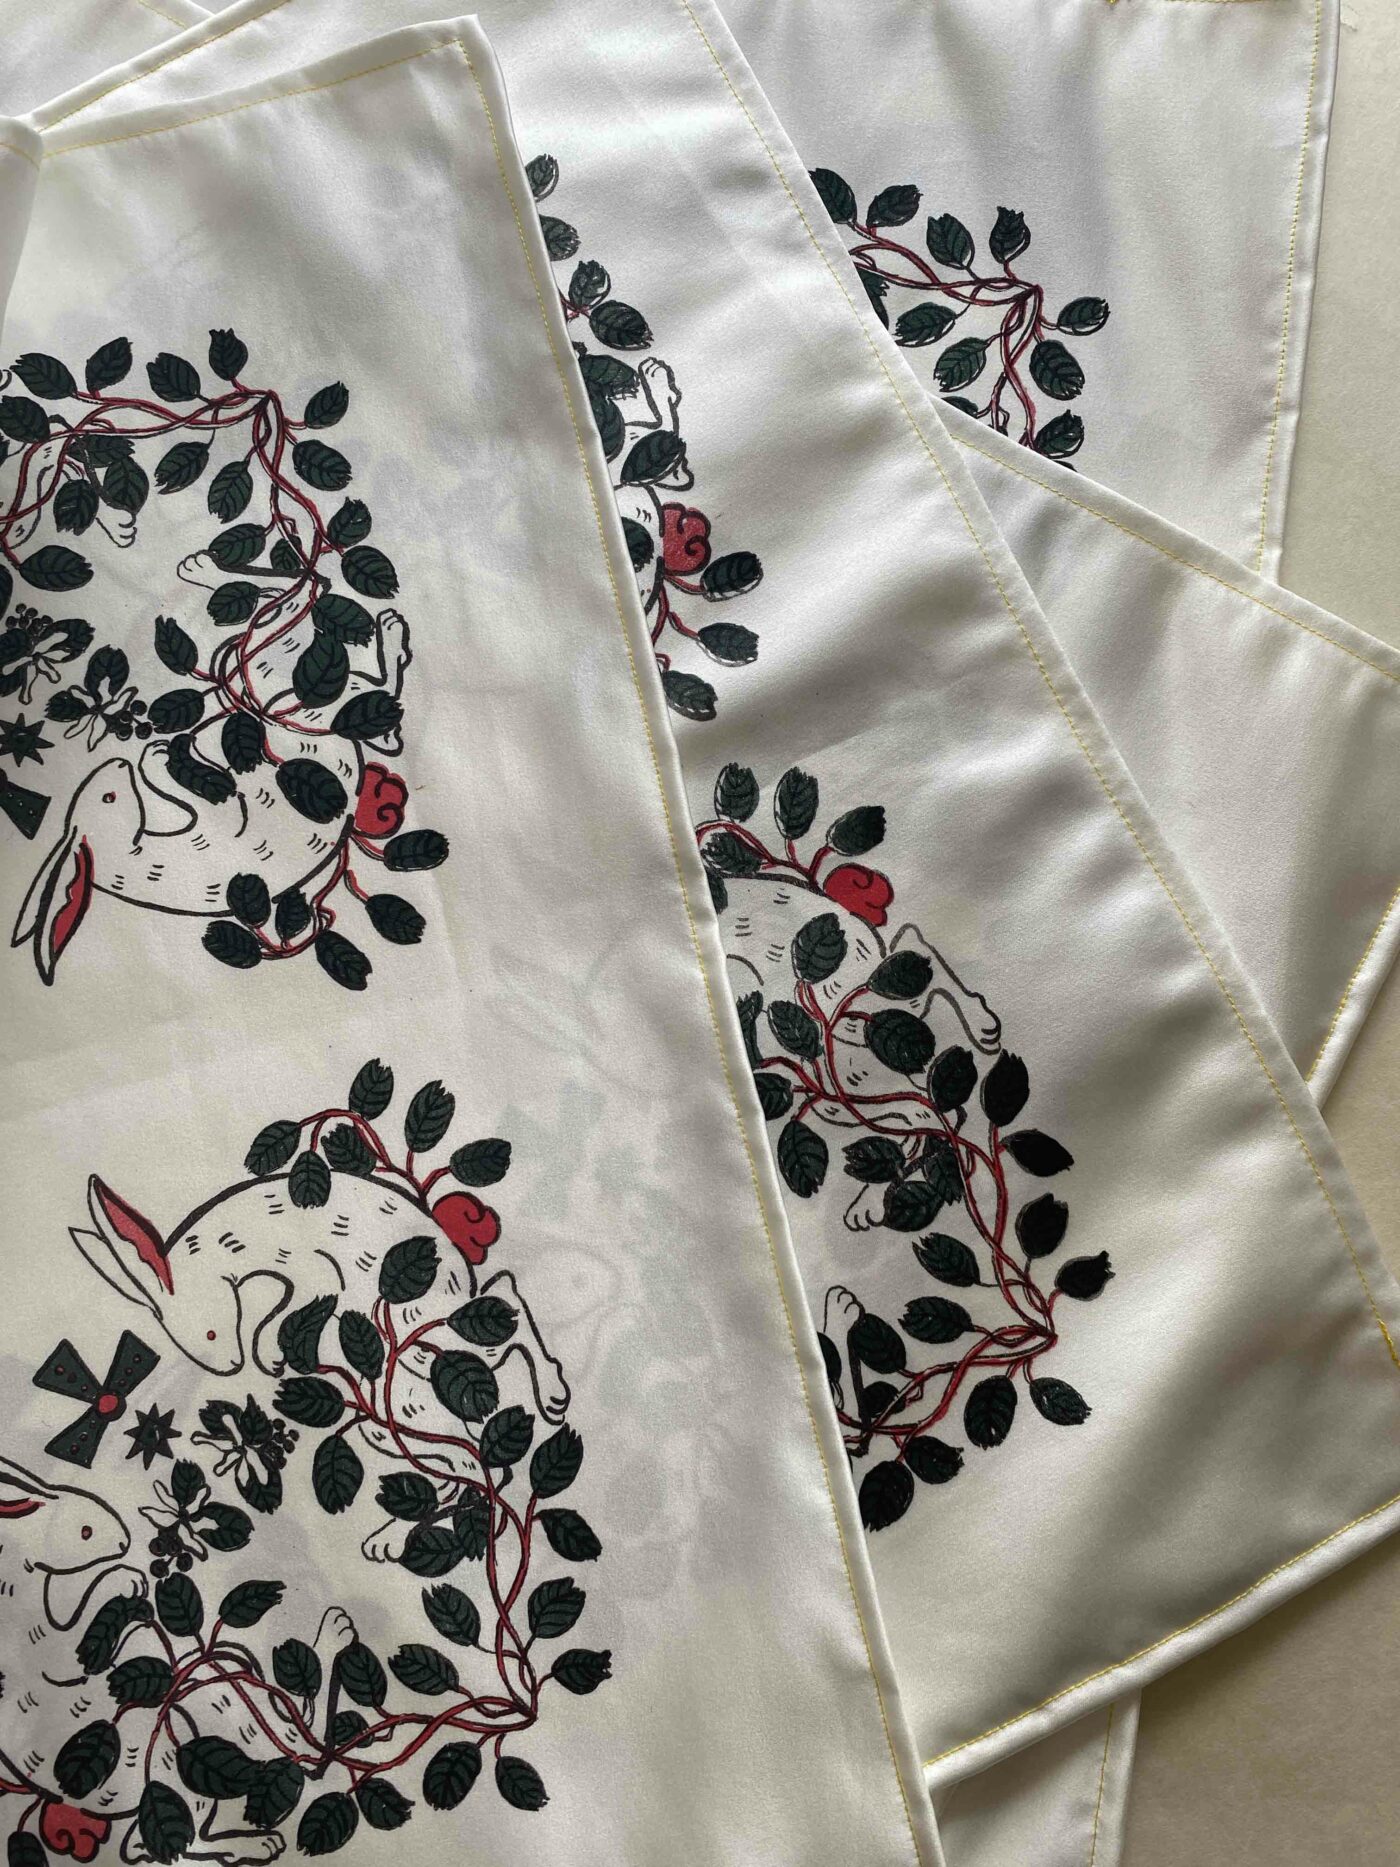 A layered set of 4 hemmed pieces of satin with the bottom 3 partially obscured. They are screenprinted with a rabbit and saskatoon berry motif in each corner using a black outline and red and green accents.